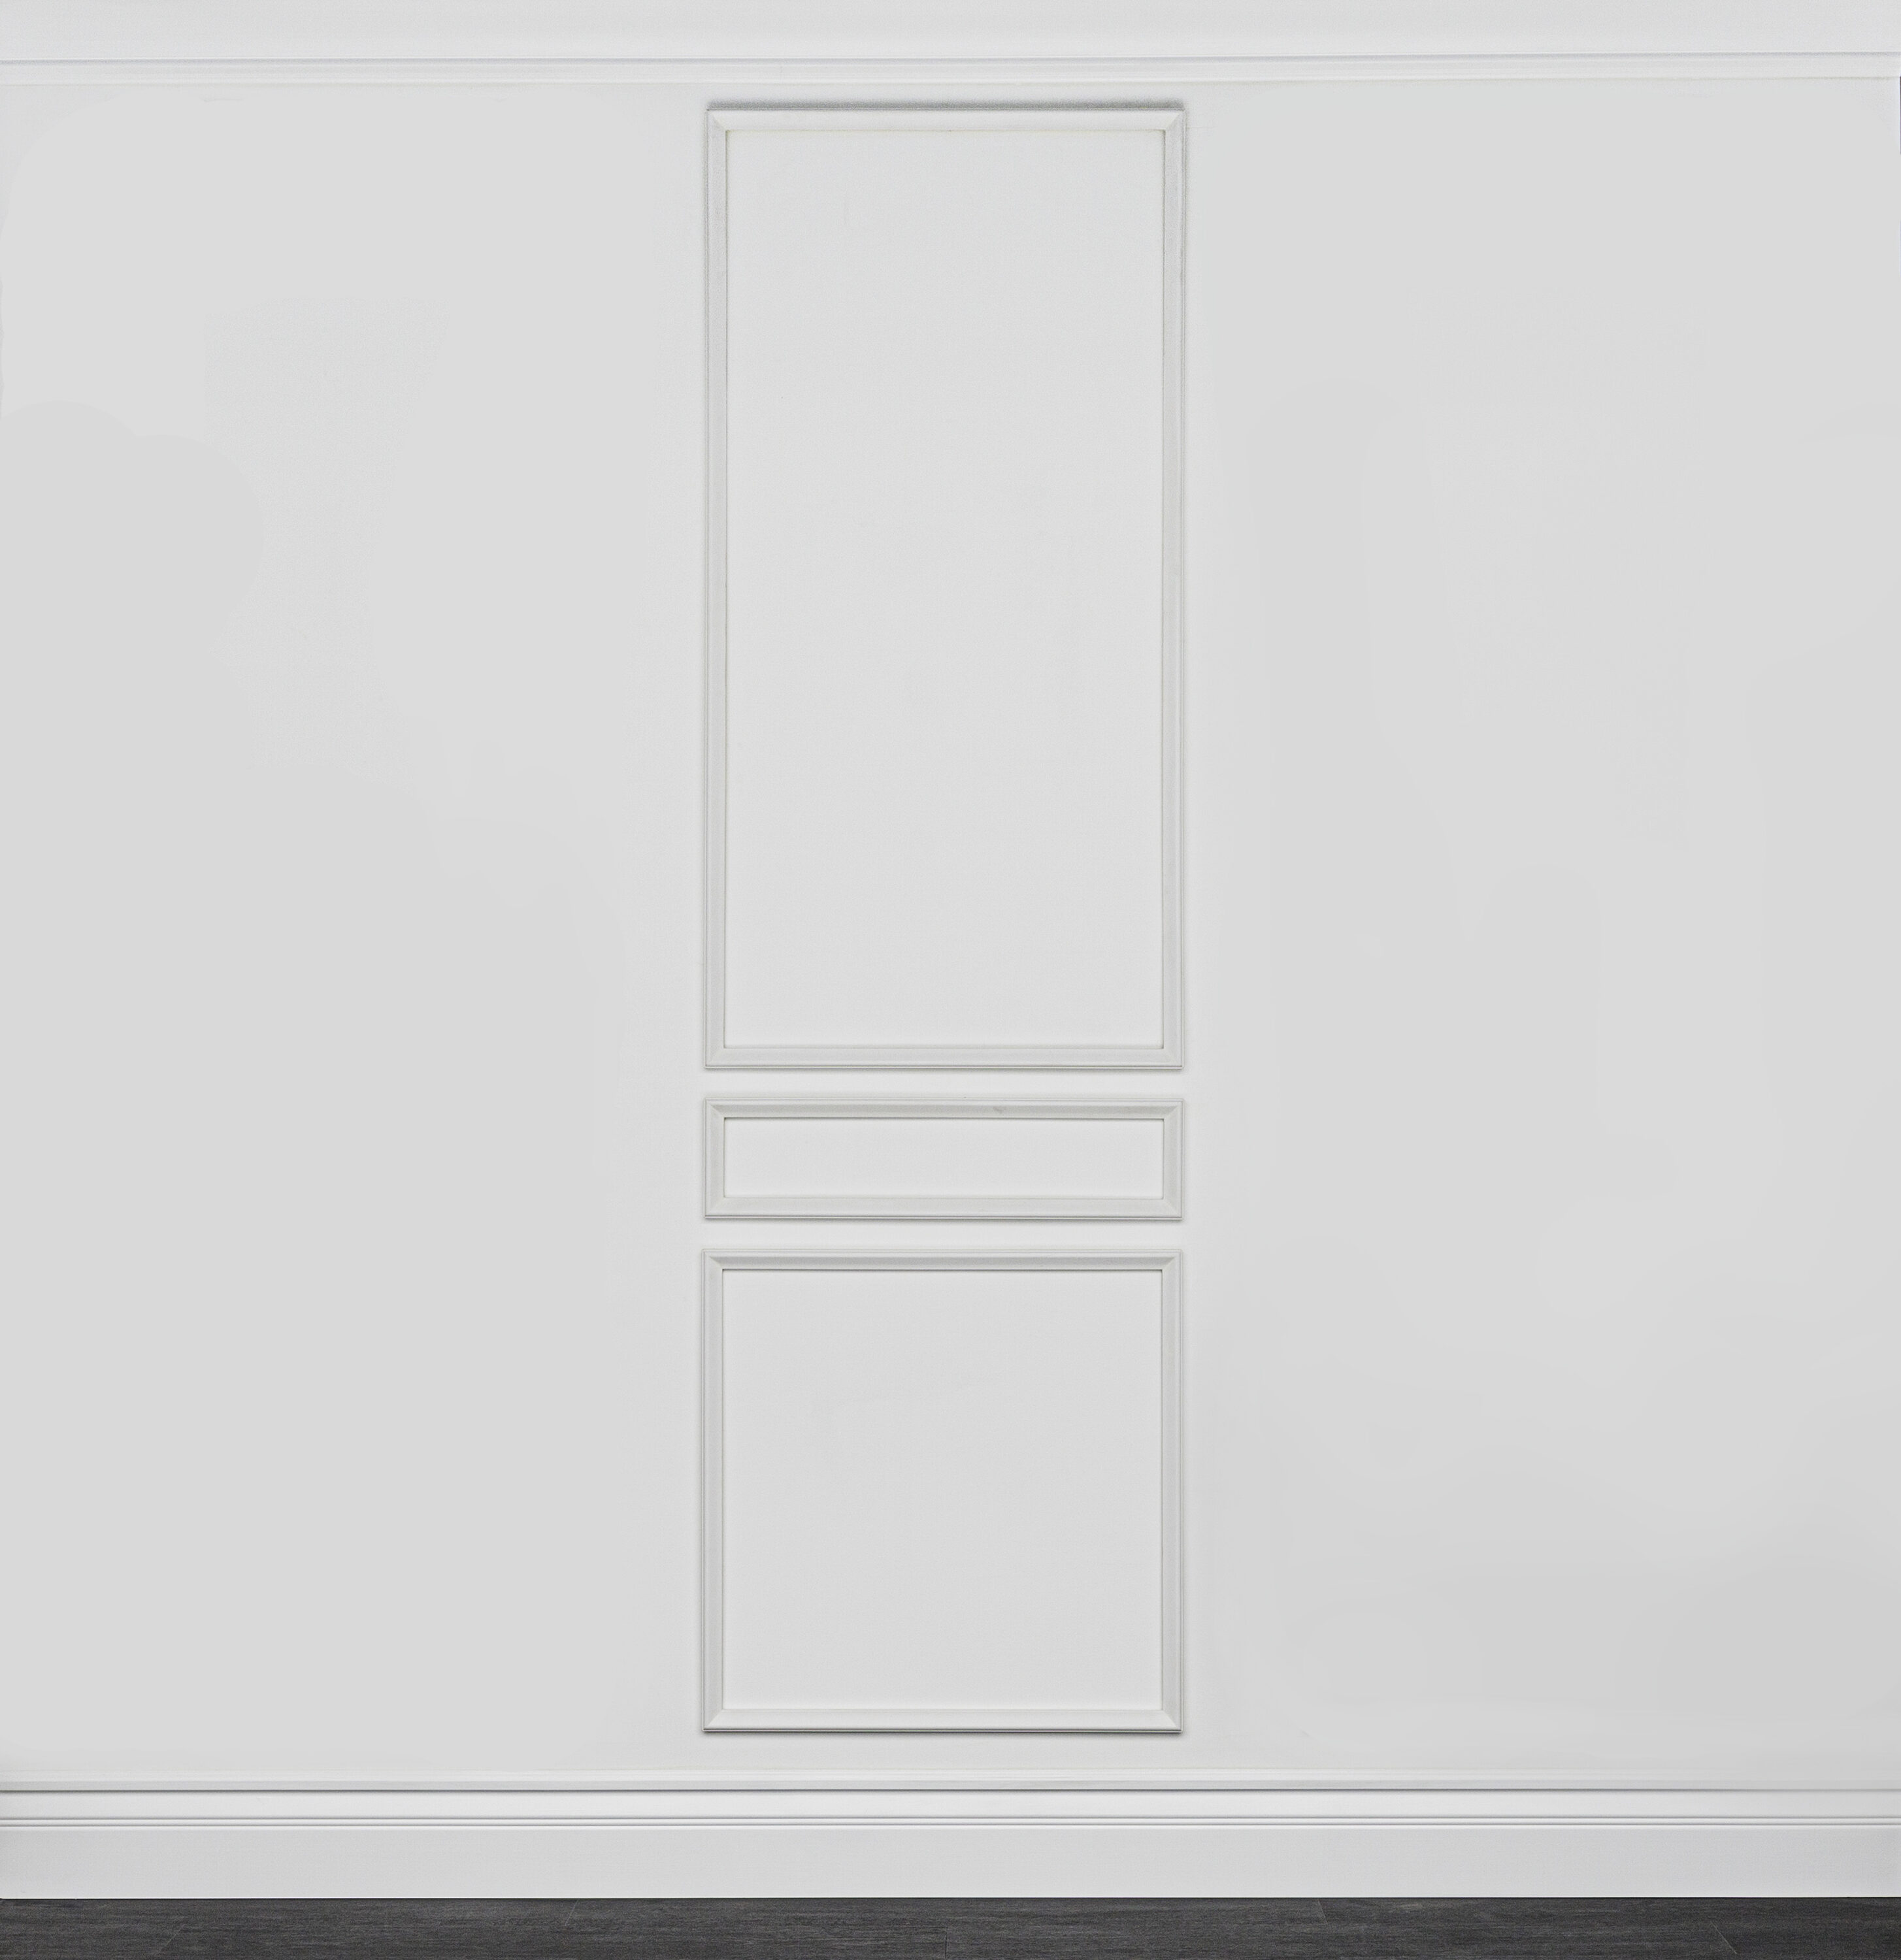 Luxe Architectural Classic Wall Moulding Multiple Sizes Poplar Primed Picture Frame Moulding in White | LA-3PC-WMK-FP